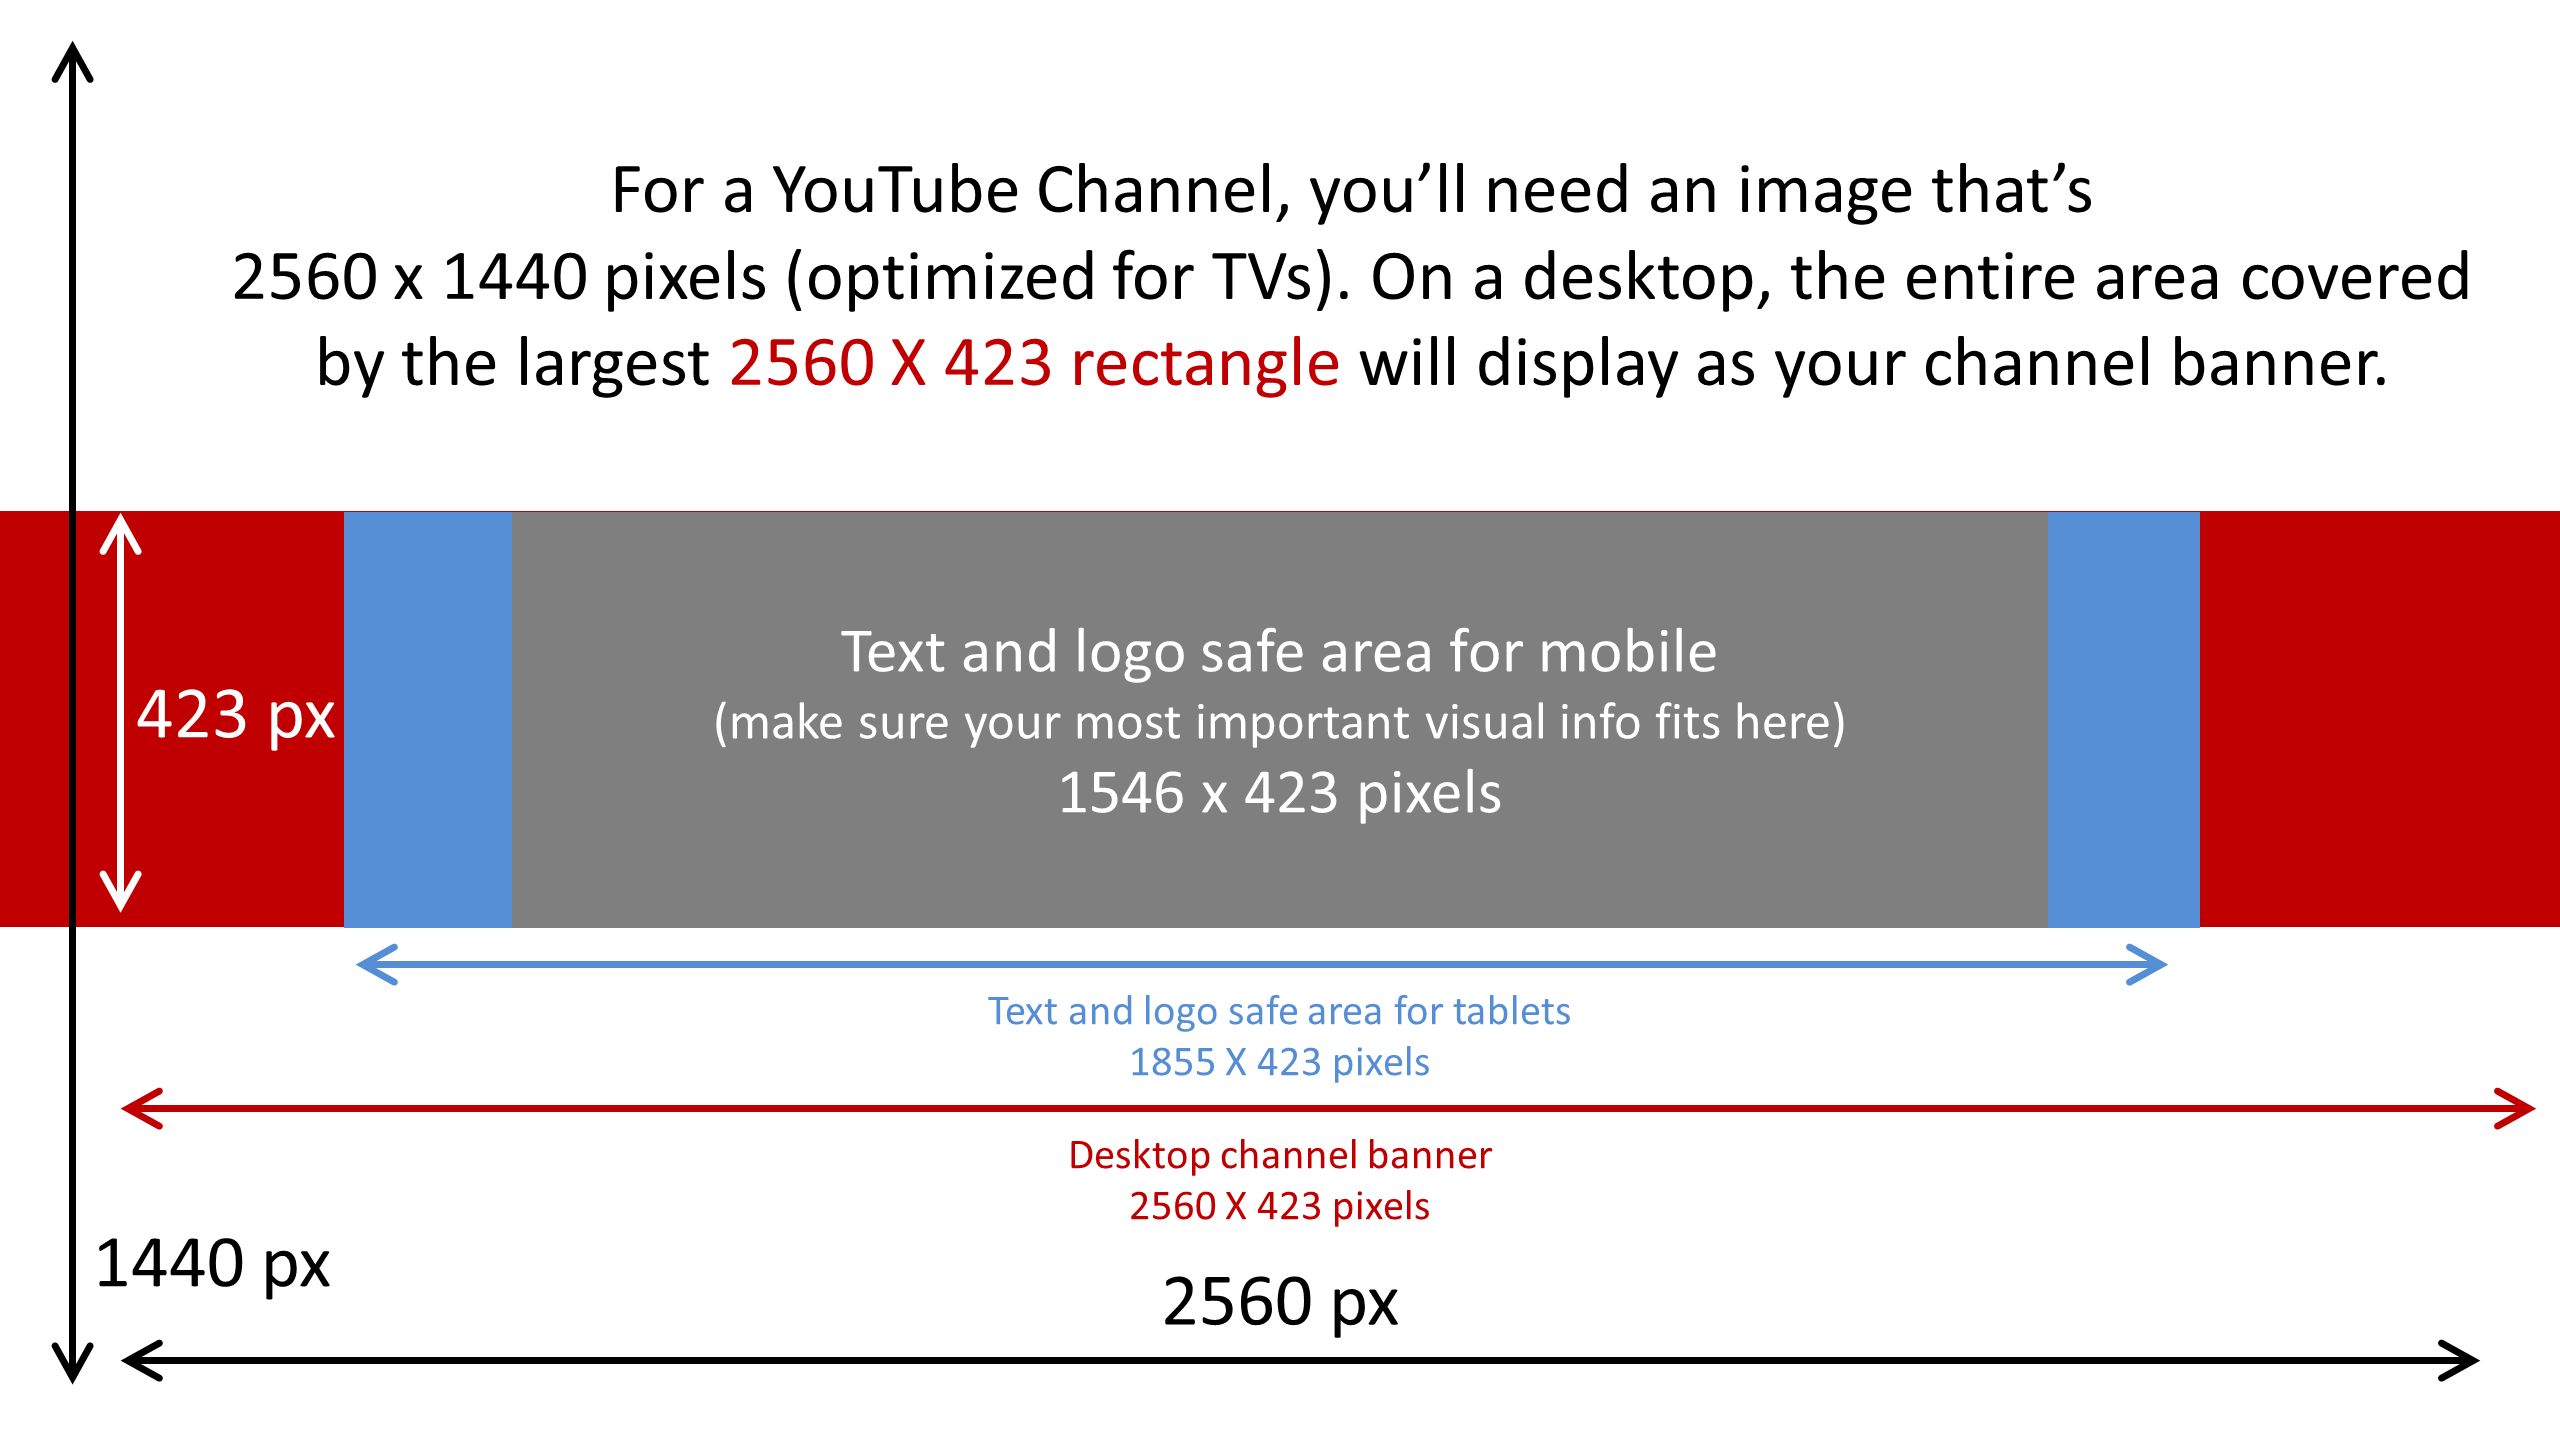 For a YouTube Channel, you’ll need an image that’s 2560 x 1440 pixels (optimized for TVs). On a desktop, the entire area covered by the largest 2560 X 423 rectangle will display as your channel banner.